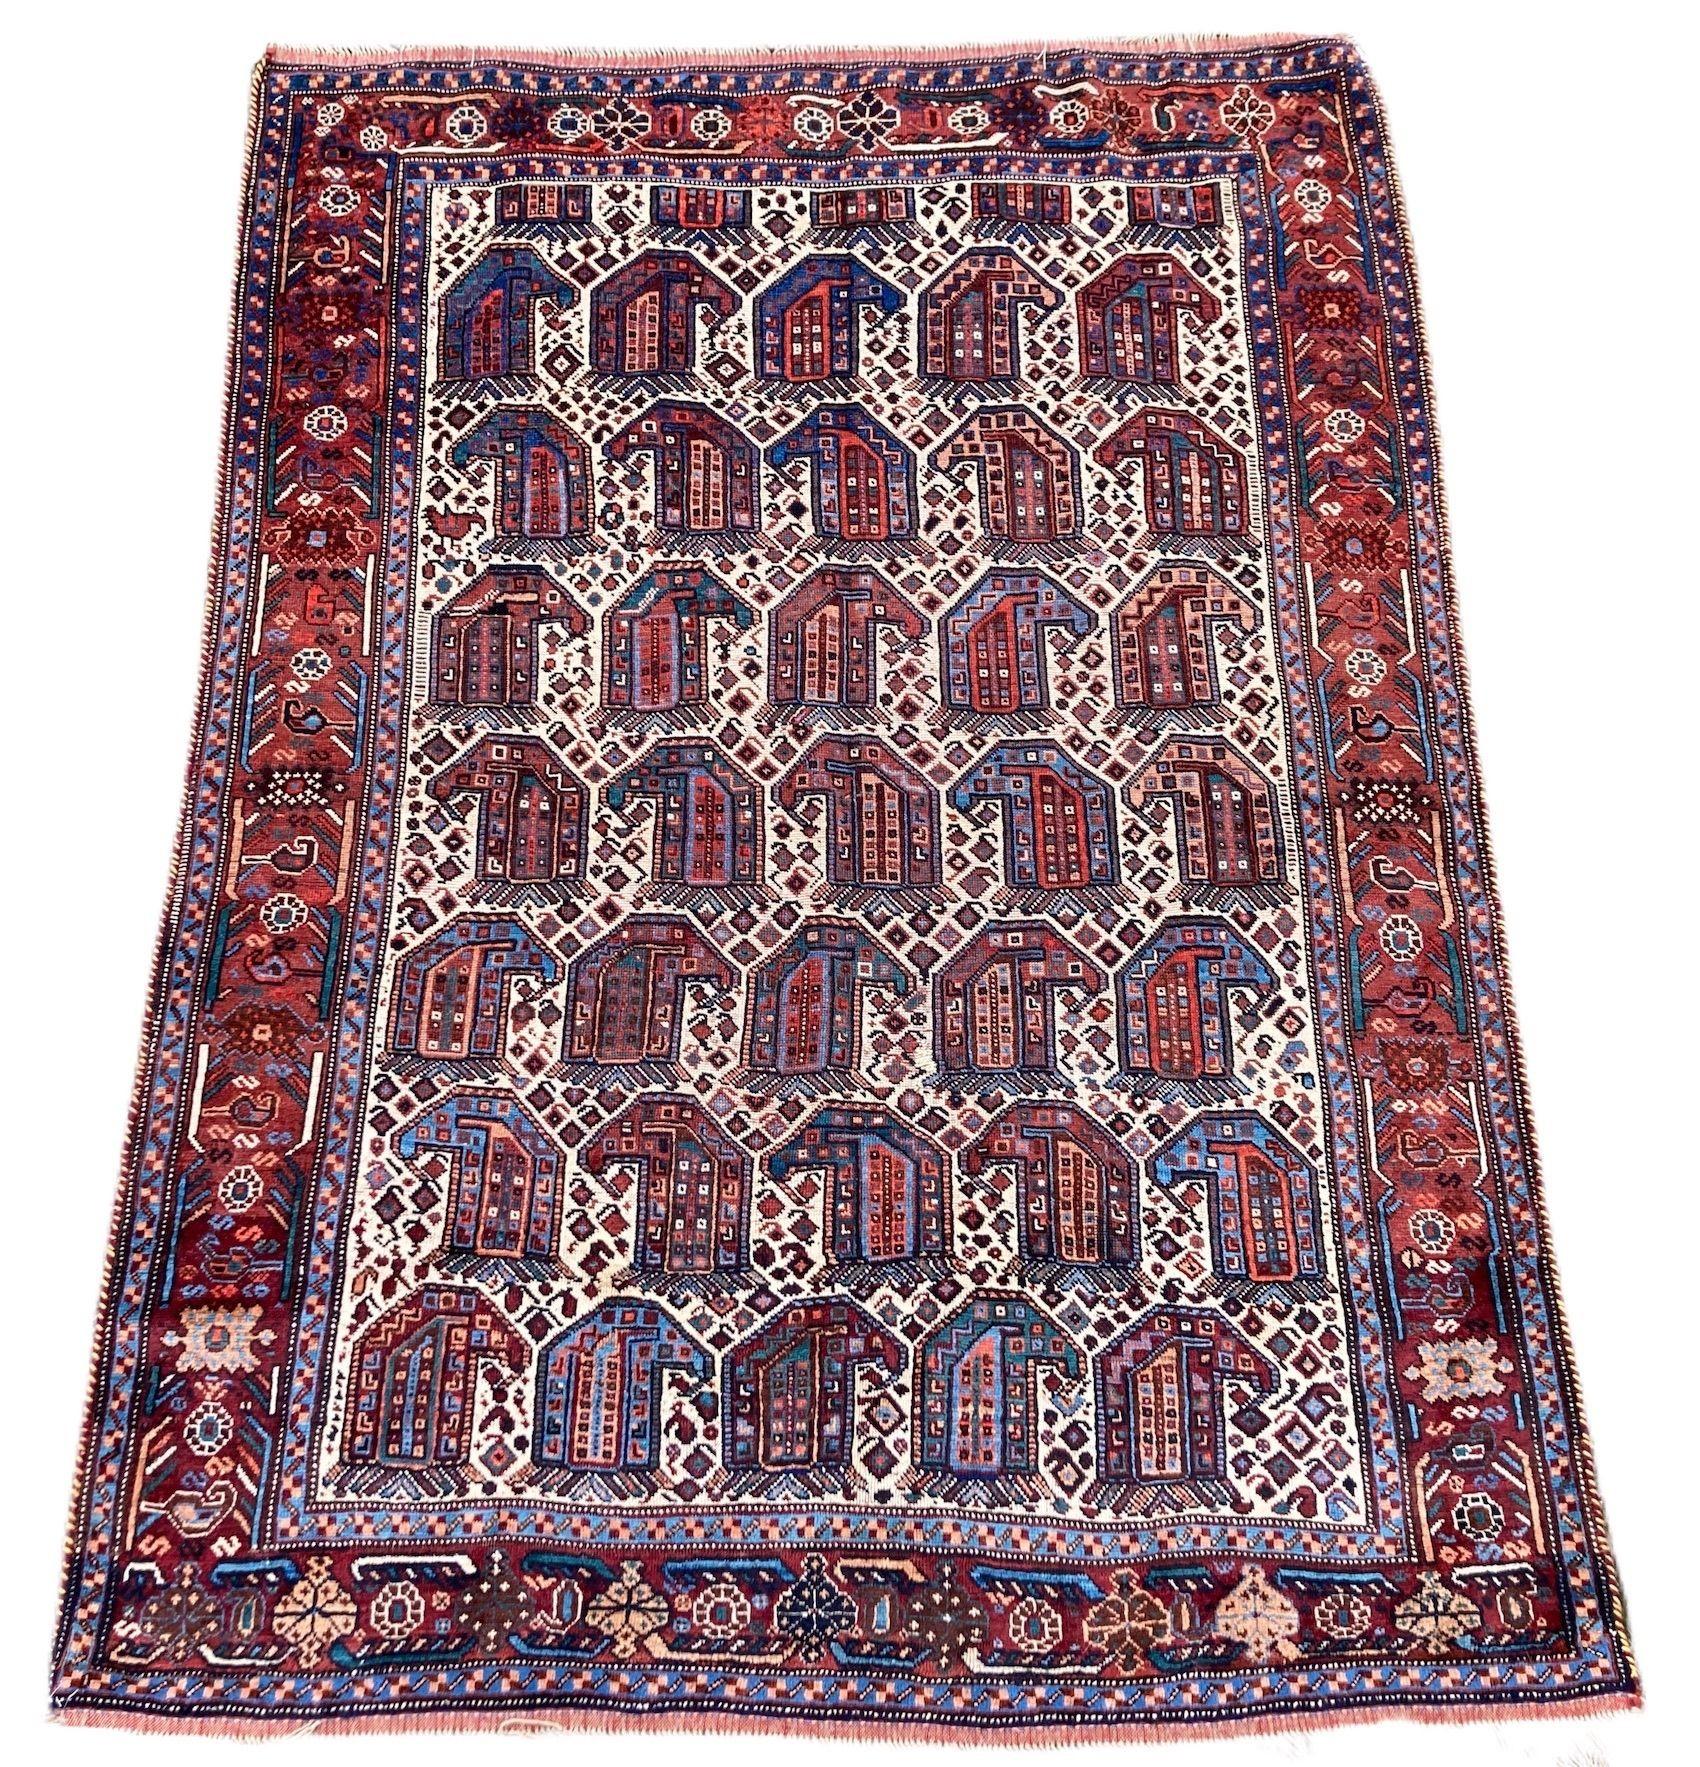 A beautiful antique Khamseh rug, hand woven circa 1900 with an all over Boteh design on an ivory field and terracotta border. Try to find the solitary Khamseh chicken! Great secondary colours and a great example of tribal weaving.
Size: 1.90m x